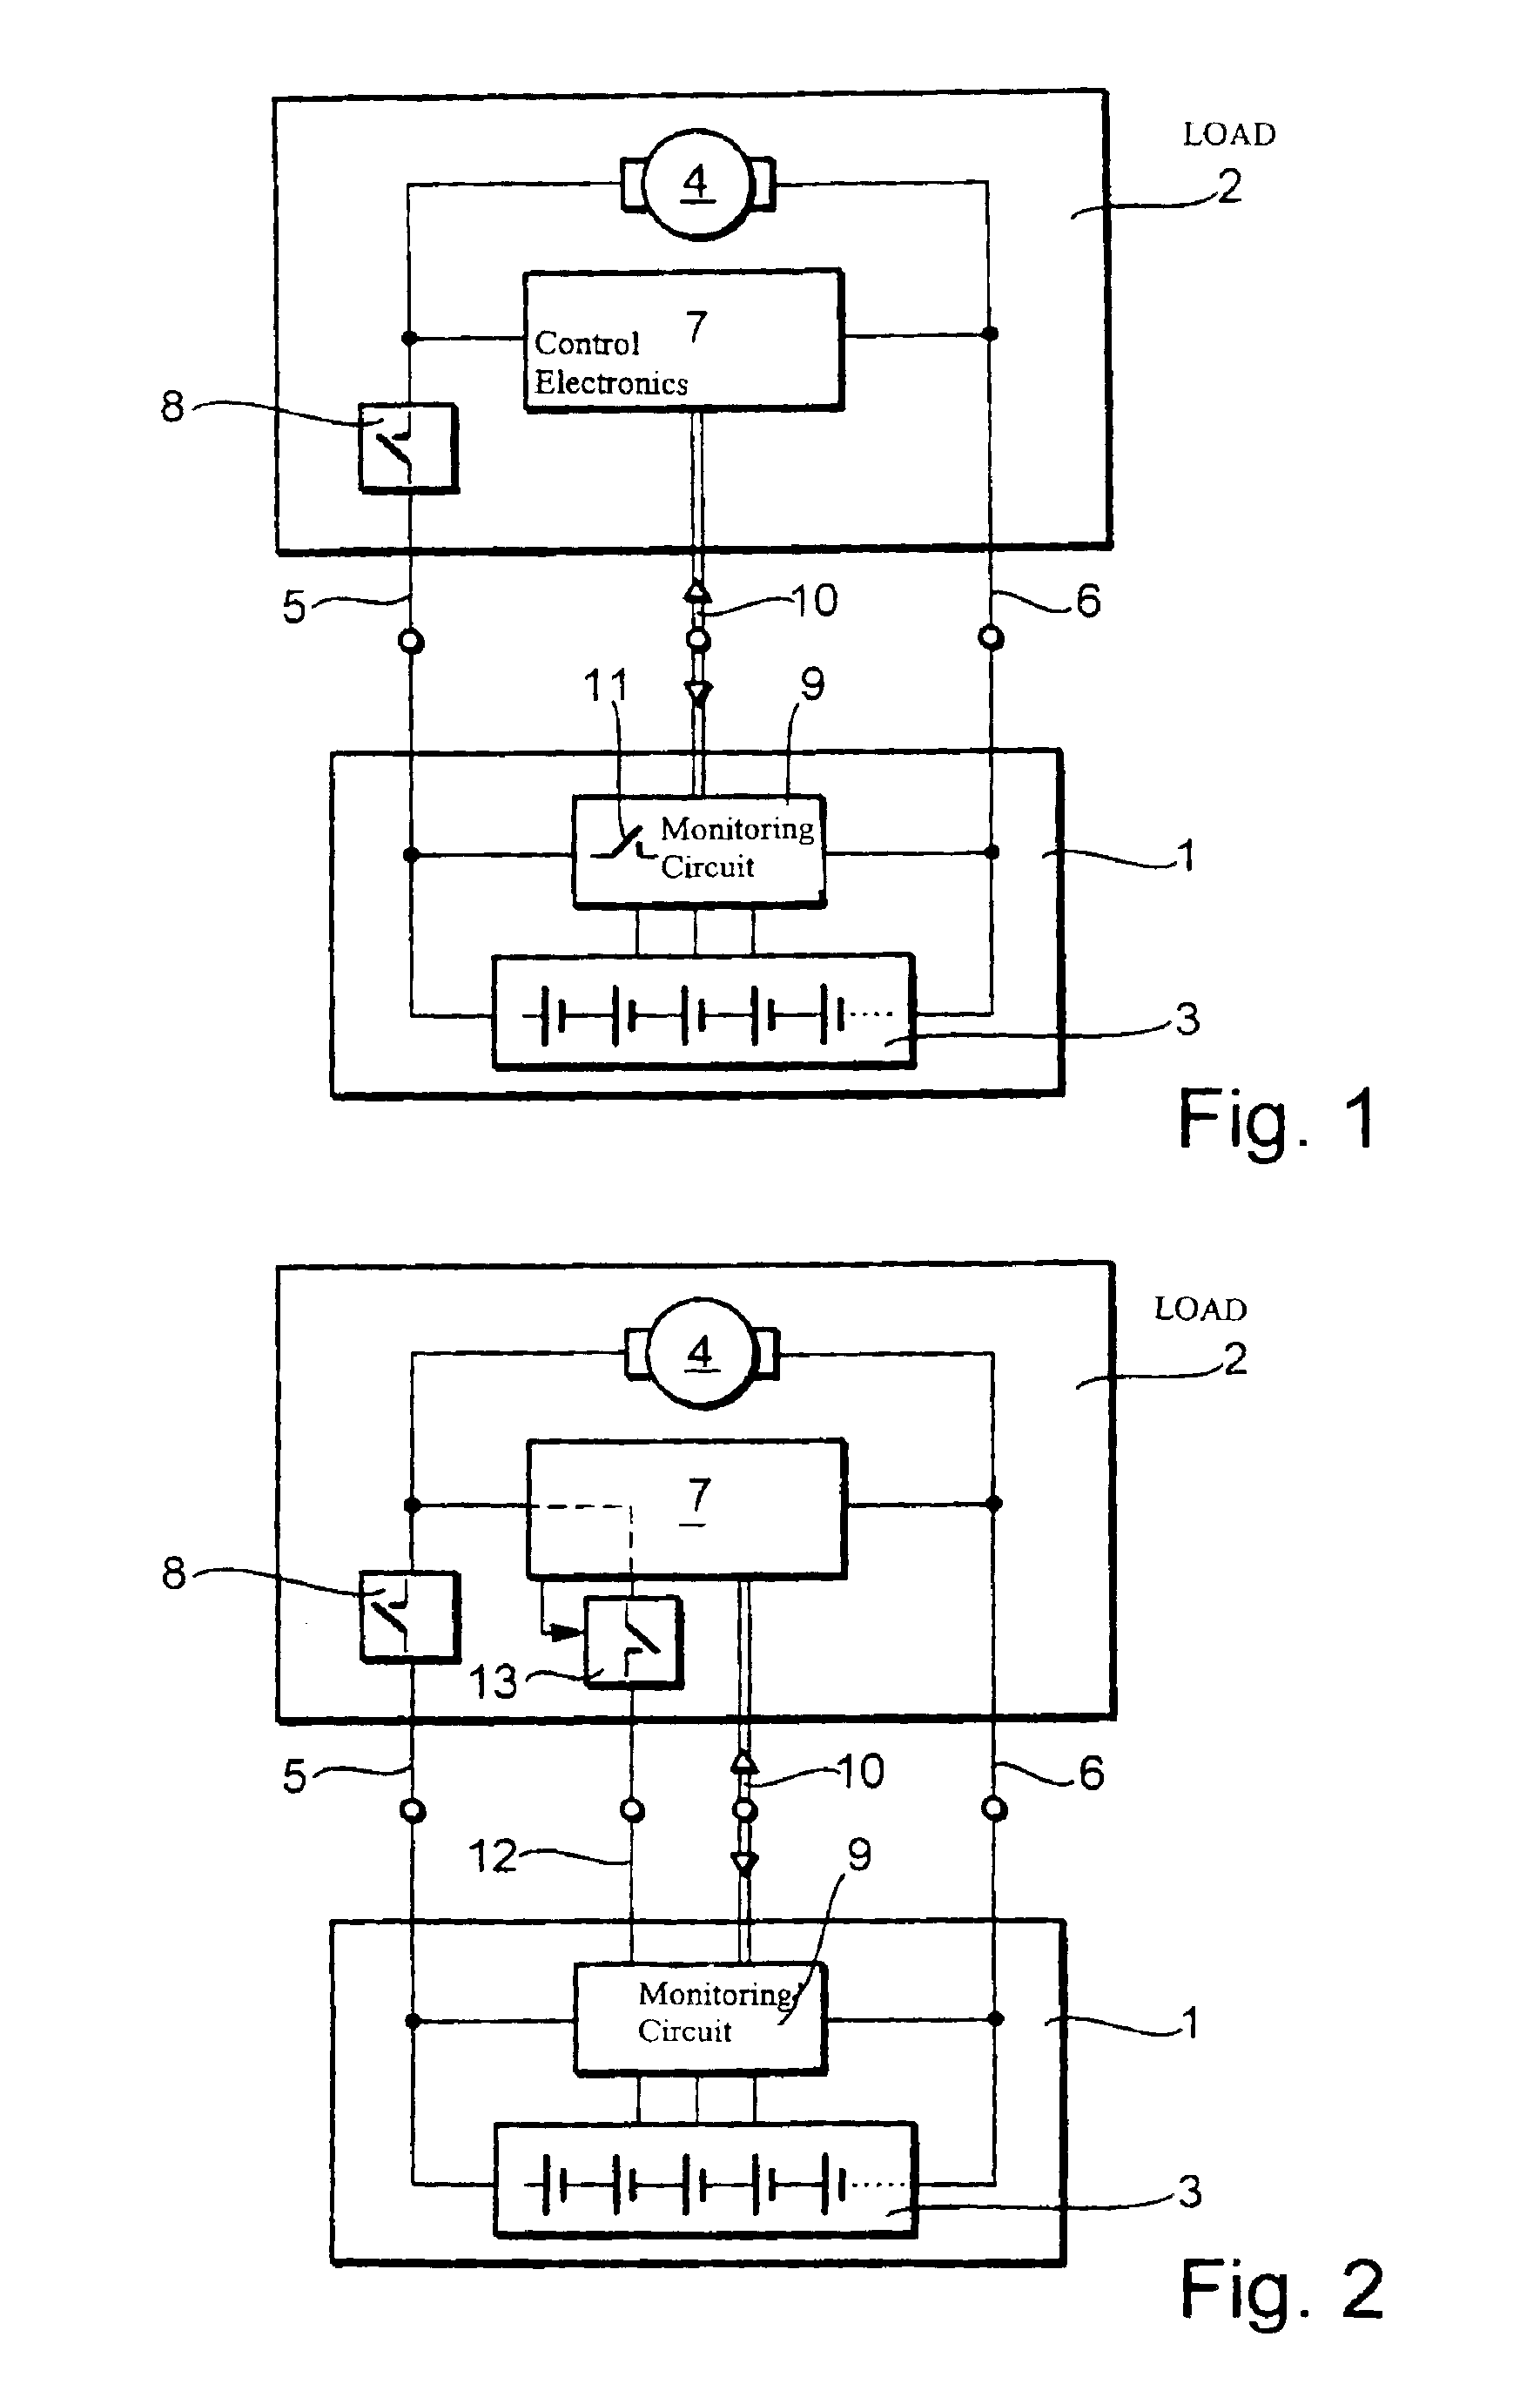 Method and apparatus for slowing the discharge process of a battery